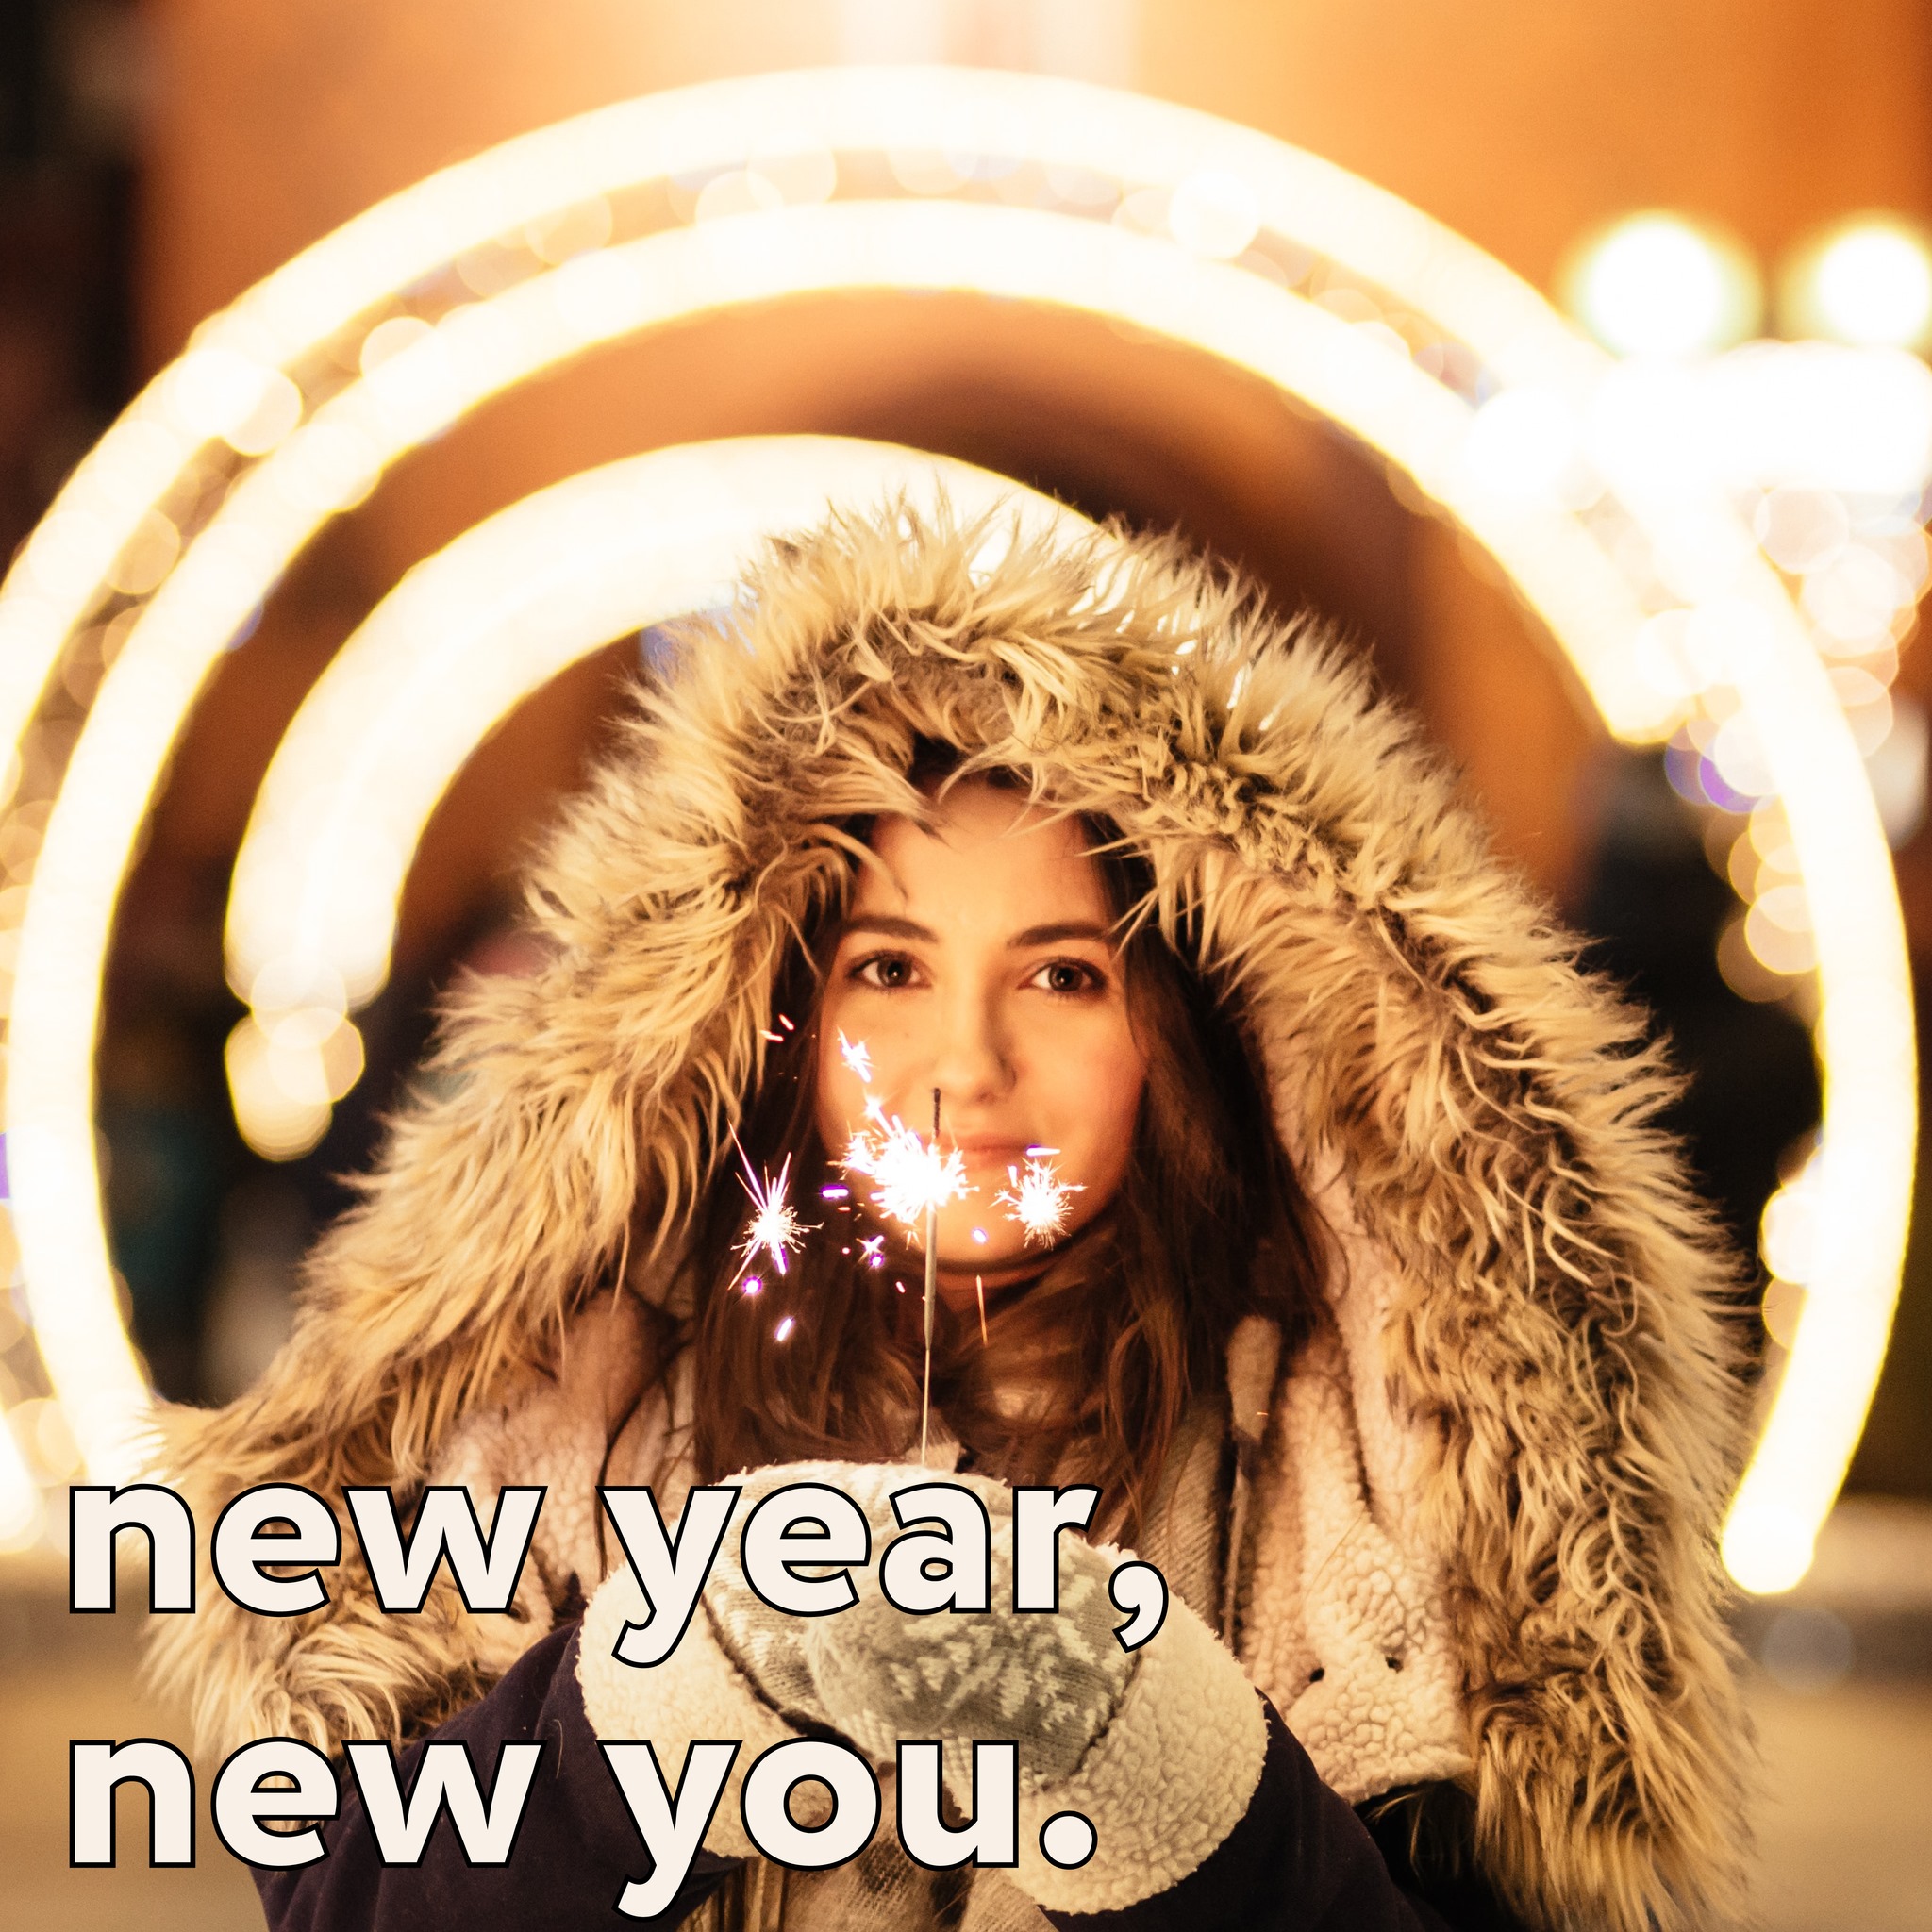 Girl with brown hair in fluffy coat holding sparklers